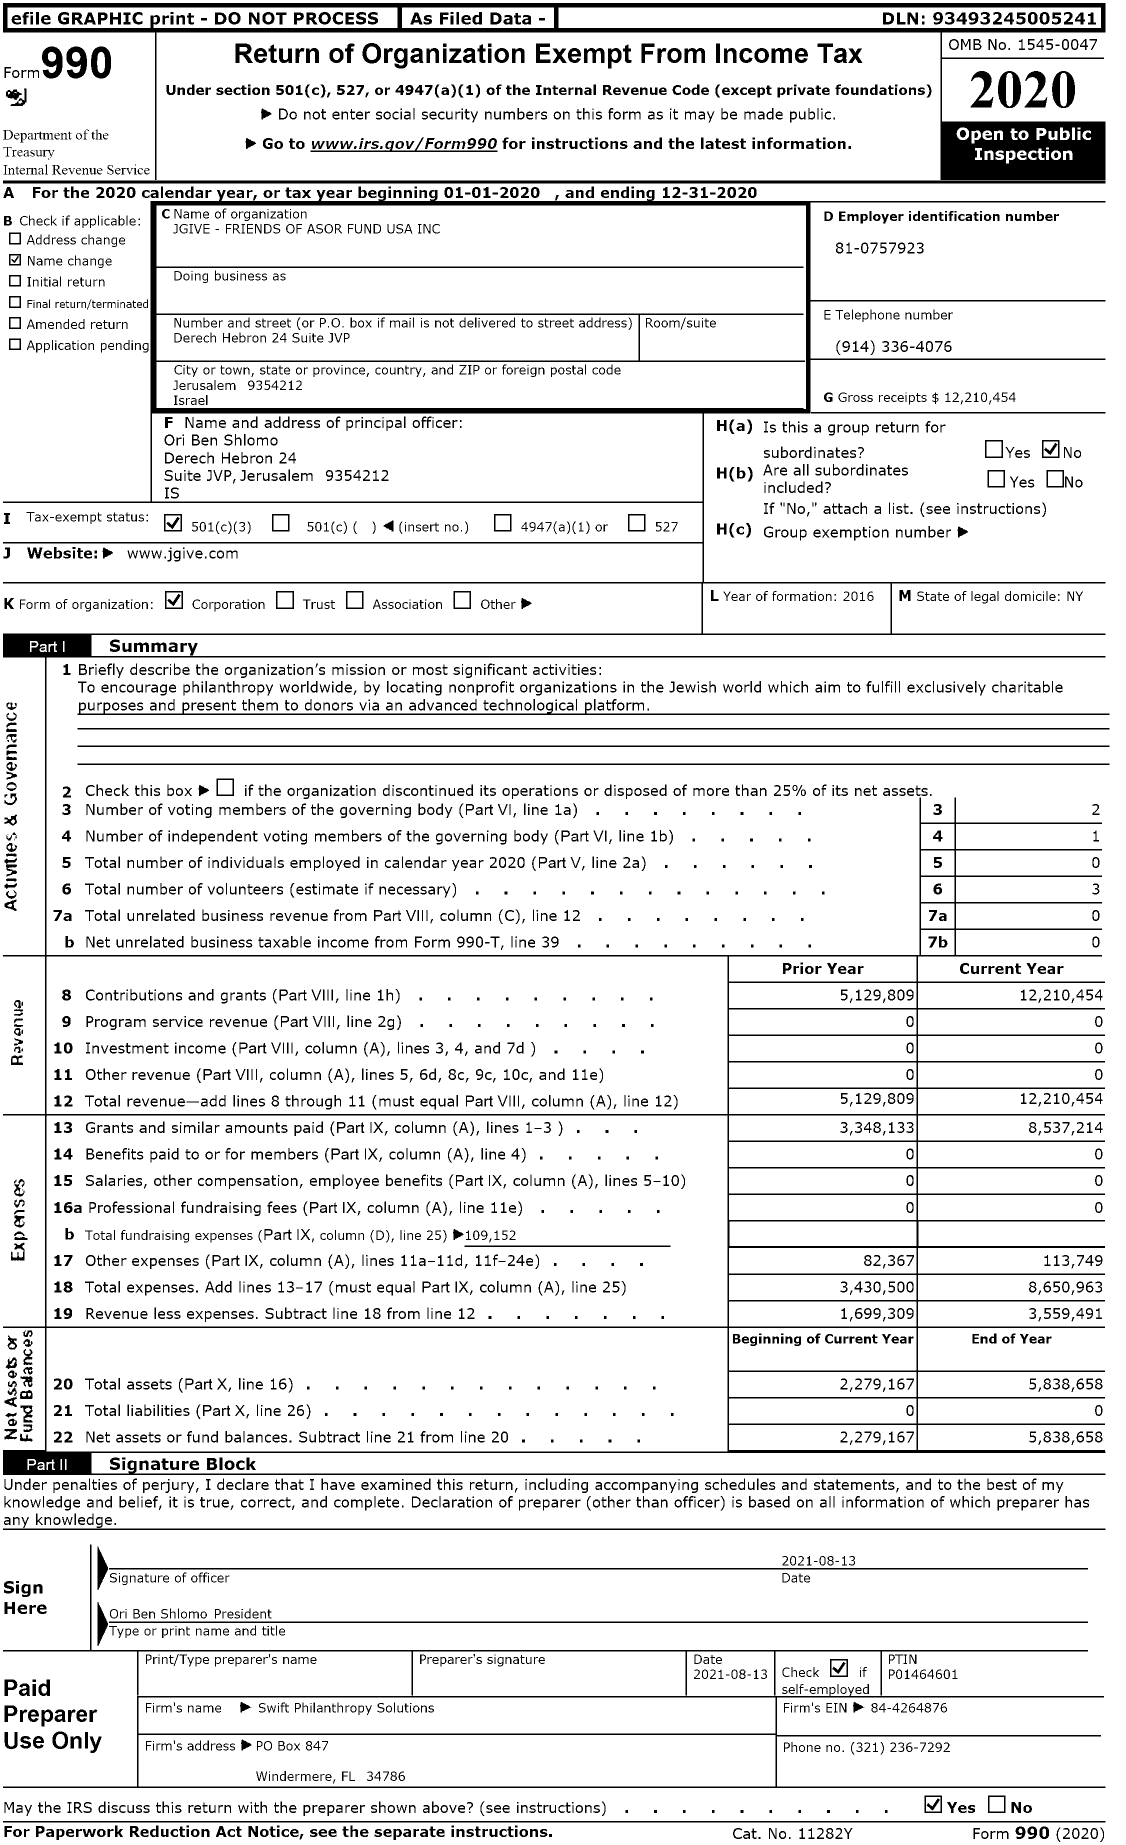 Image of first page of 2020 Form 990 for JGive - Friends of Asor Fund USA (JGive)